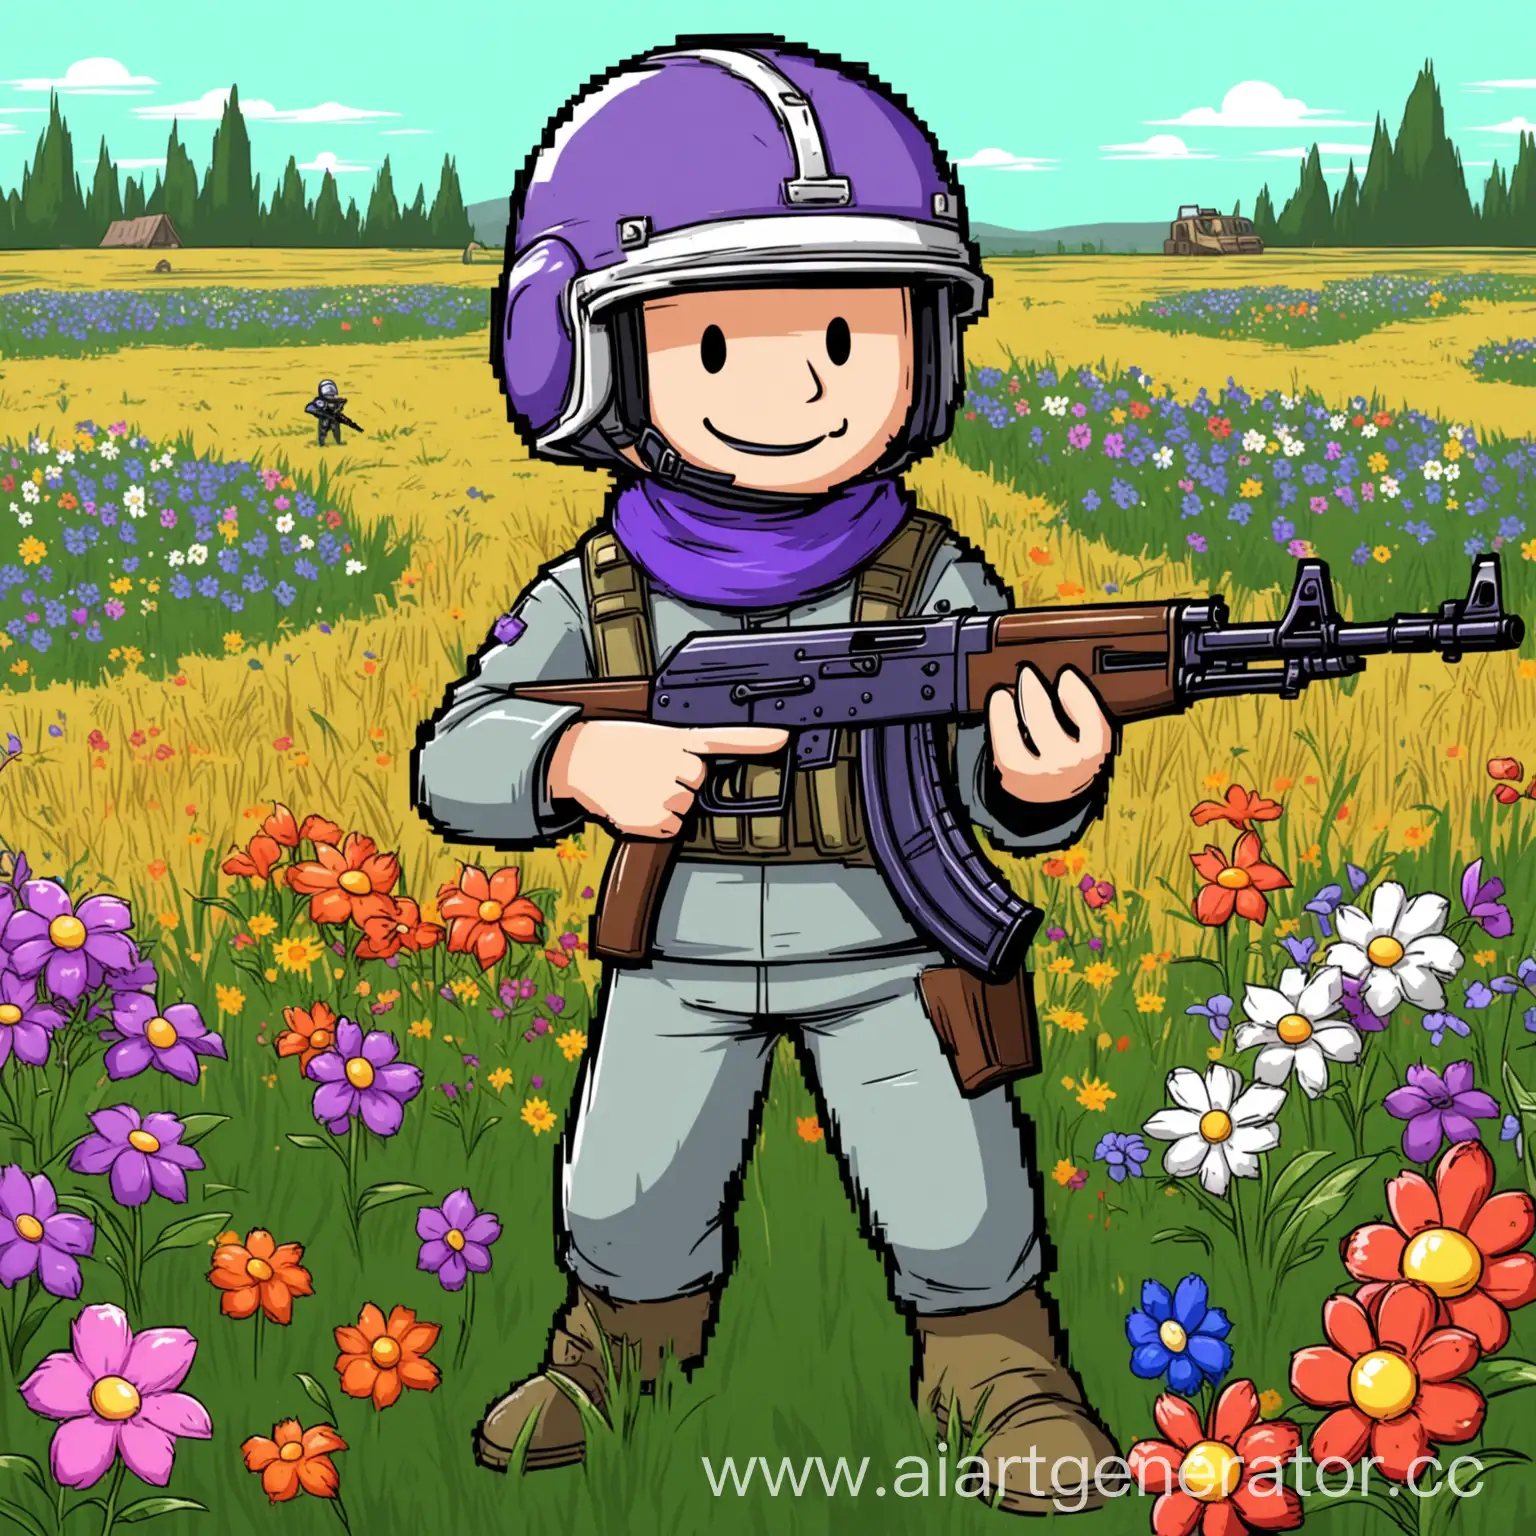 Cartoon-Character-in-Flower-Field-with-Helmet-and-AK47